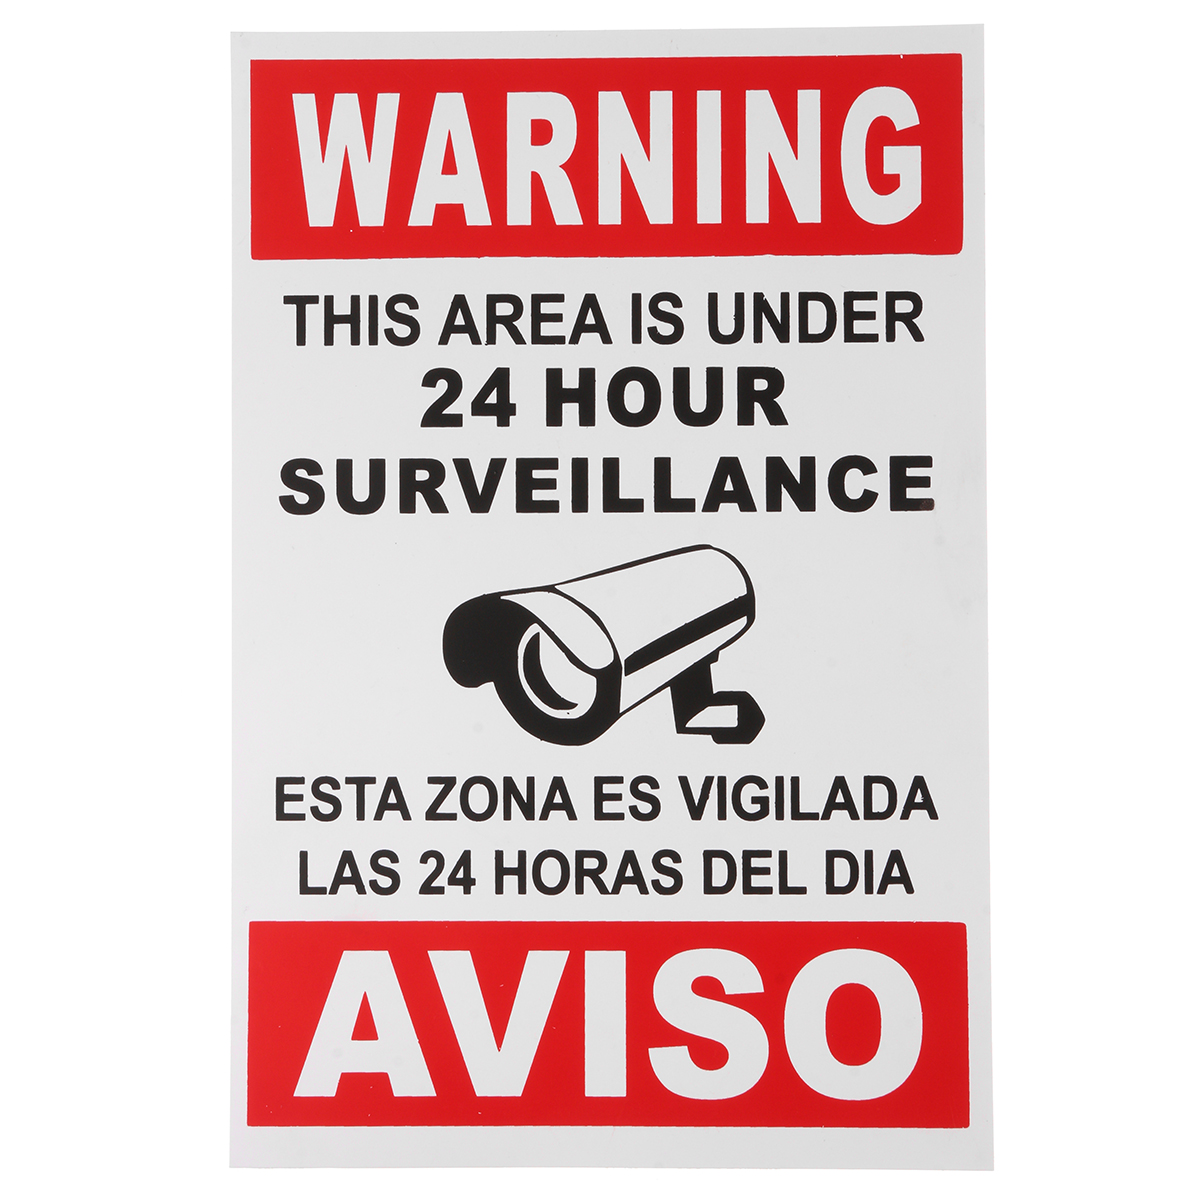 English-Spanish-Security-Warning-Sign-Camera-Sticker-Warning-This-Area-Is-Under-24-Hour-Surveillance-1180753-1